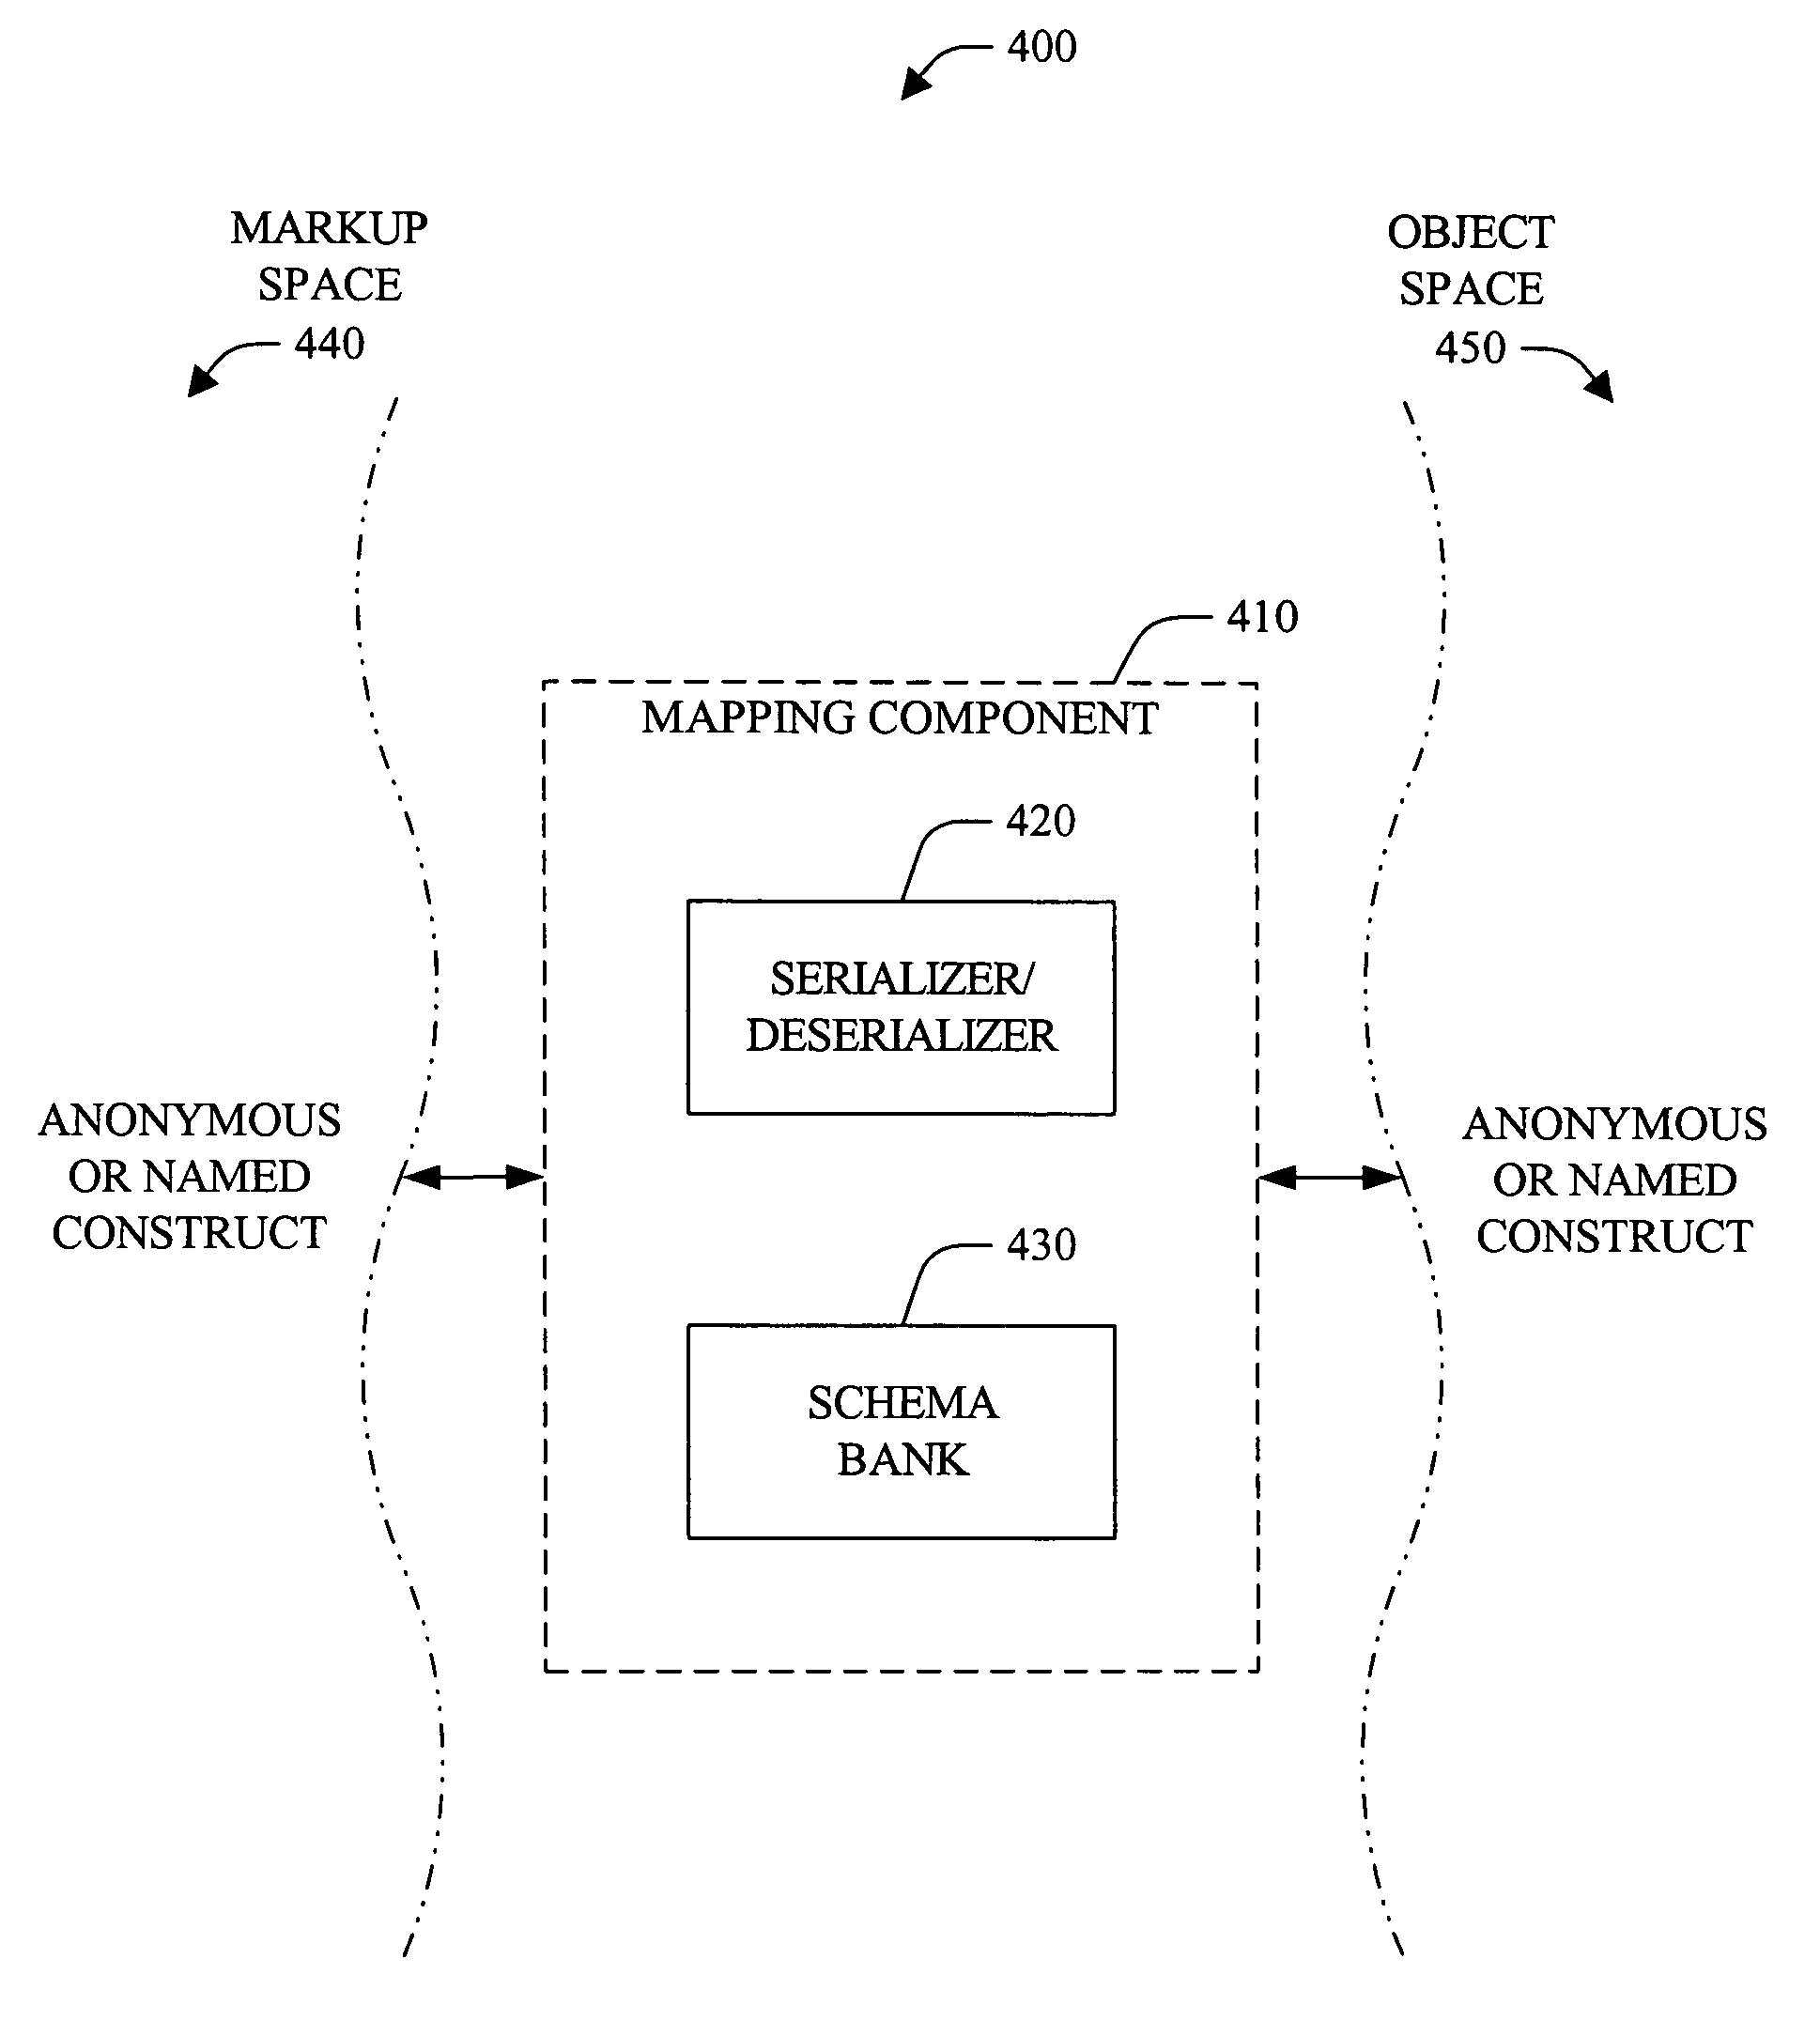 Systems and methods that transform constructs from domain to domain